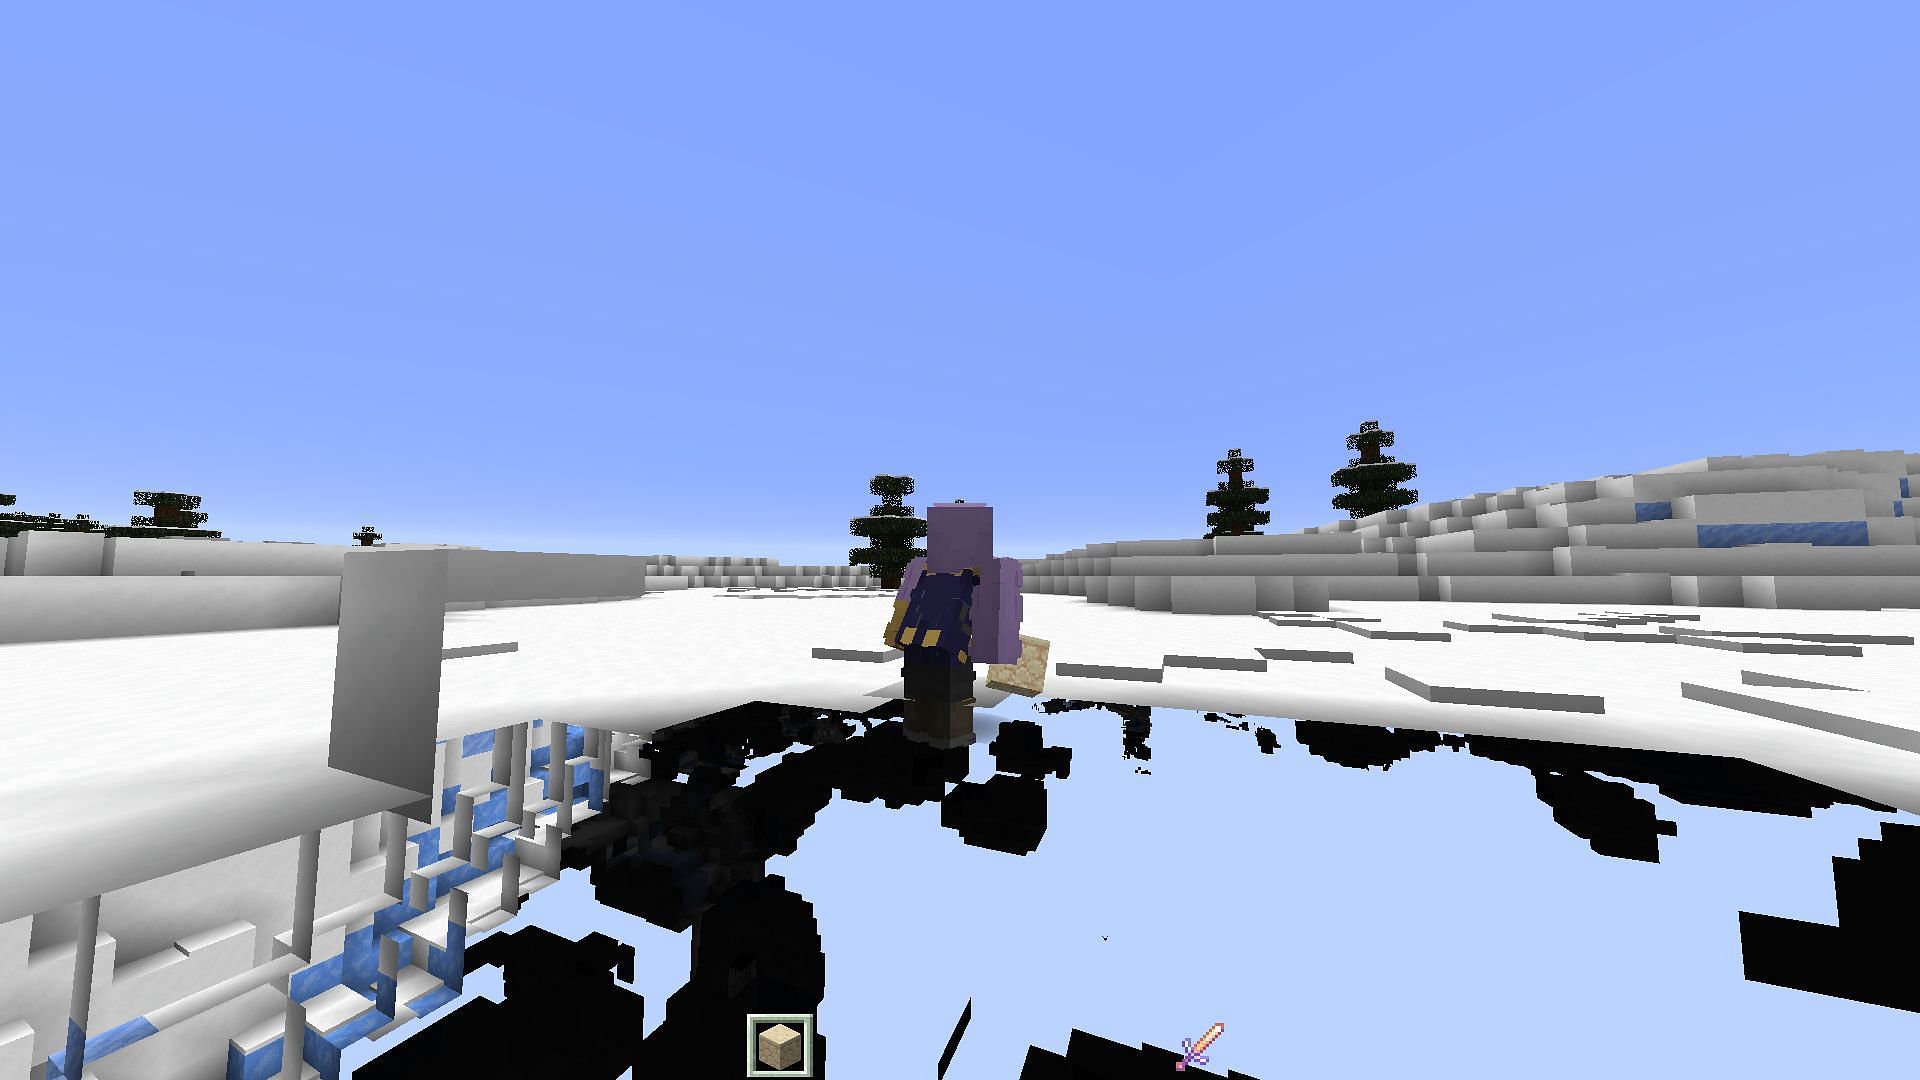 This snow-oriented x-ray issue has yet to be fixed (Image via Minecraft Bug Report)